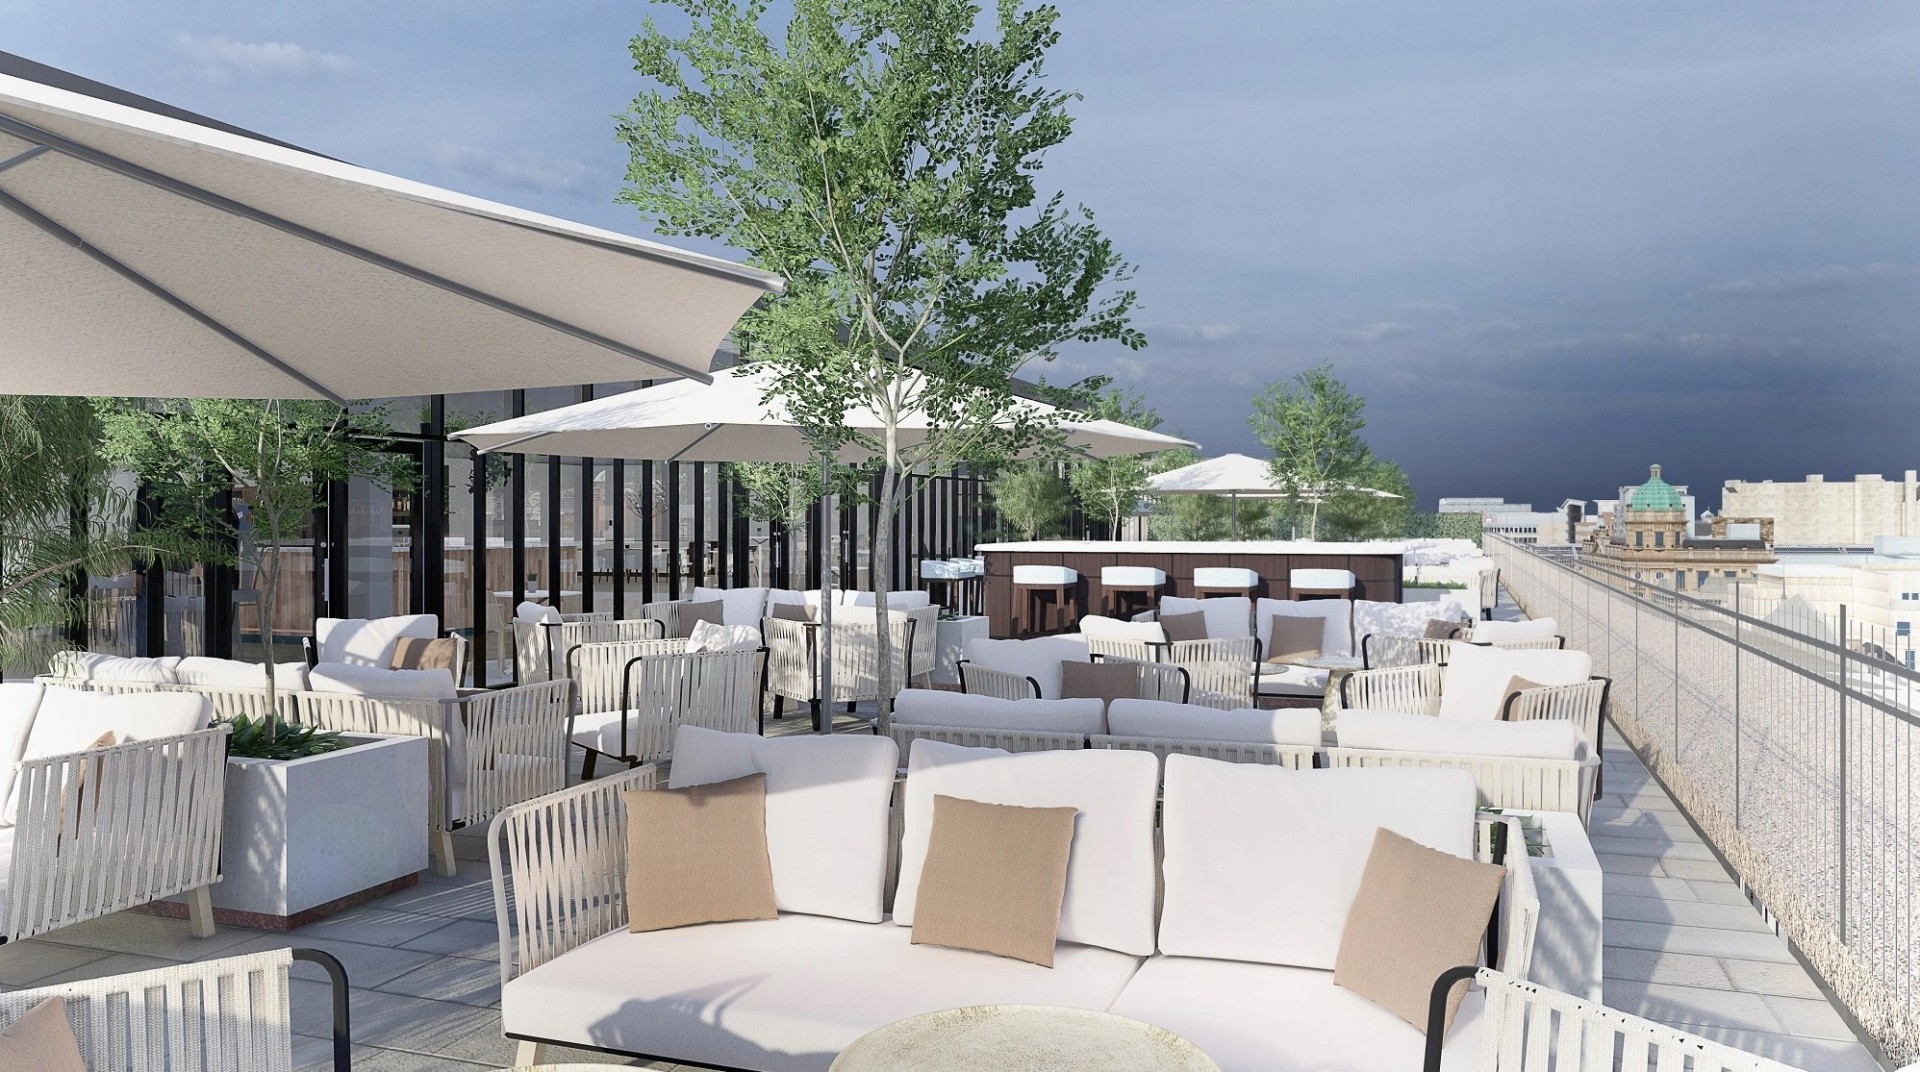 Rooftop restaurant proposal served up for Glasgow's vacant Debenhams store